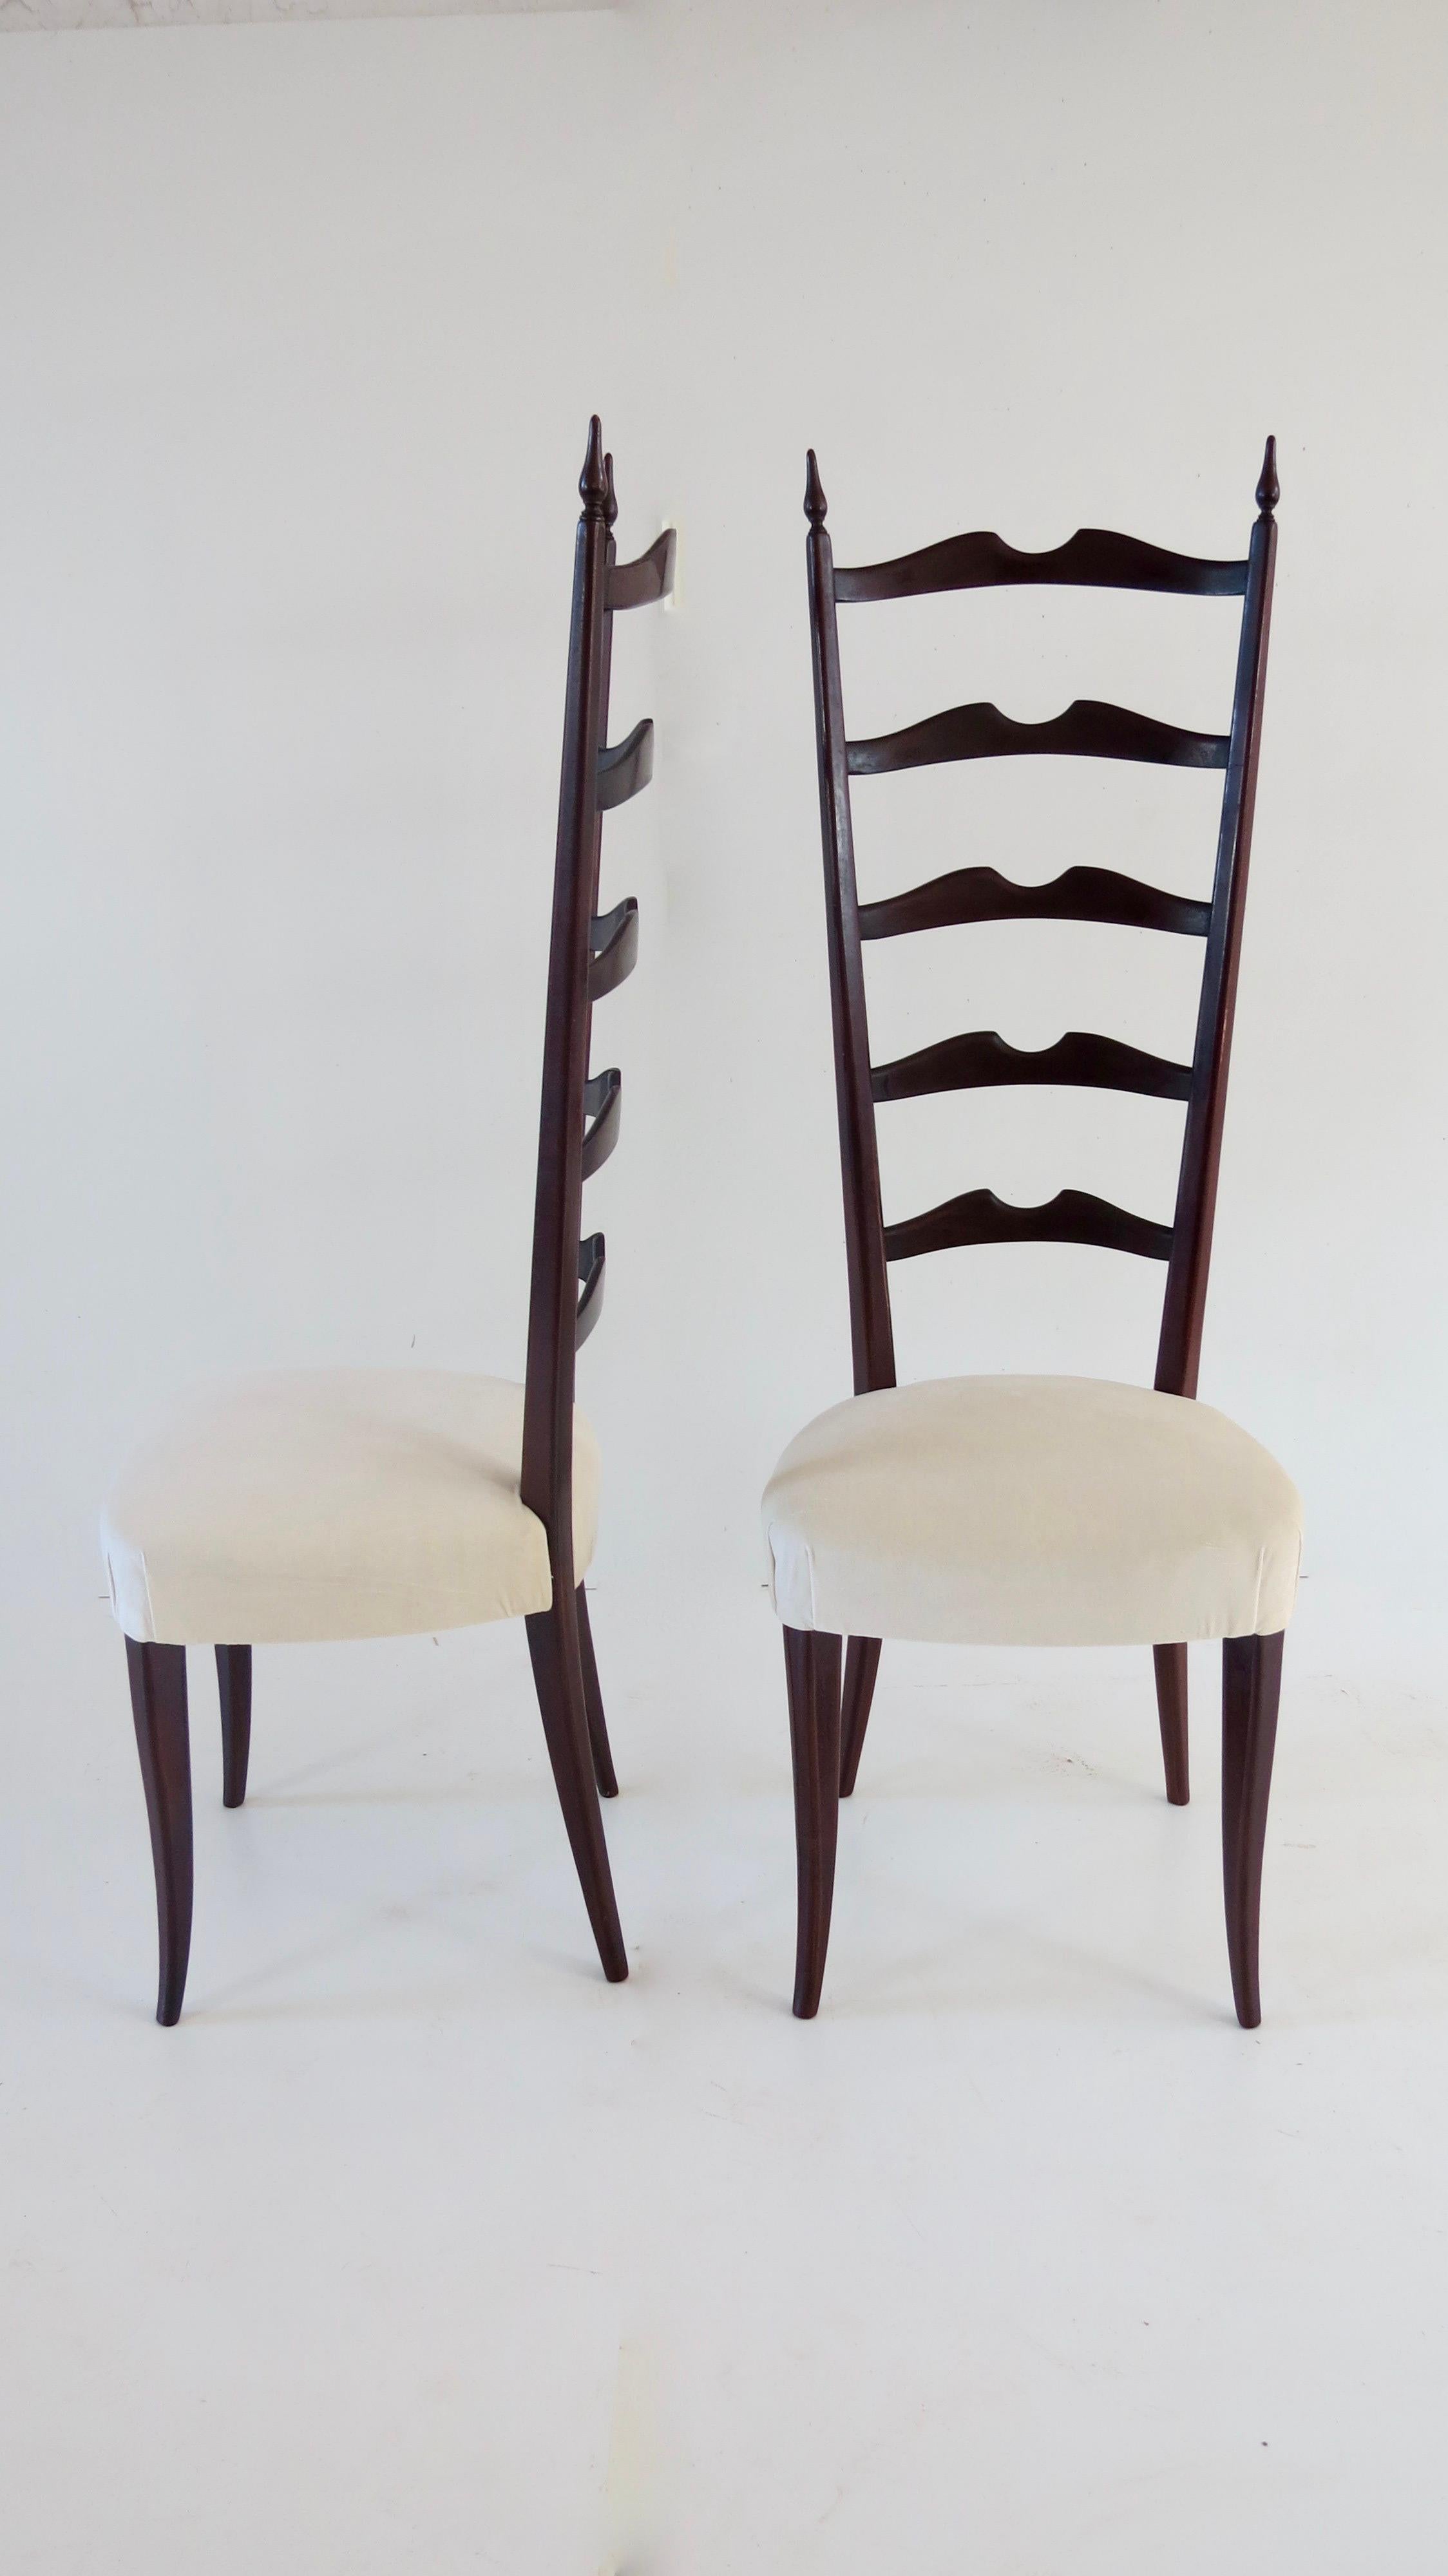 Rare set of eight high back side Chiavari ebonized dining chairs, by Paolo Buffa.
Manufactured by Marelli & Colico, Italy 
Ebonized wood, white velvet fabric
Very good condition
Measures: 50cm x 40 cm, height: 132 cm, height seat: 47 cm.